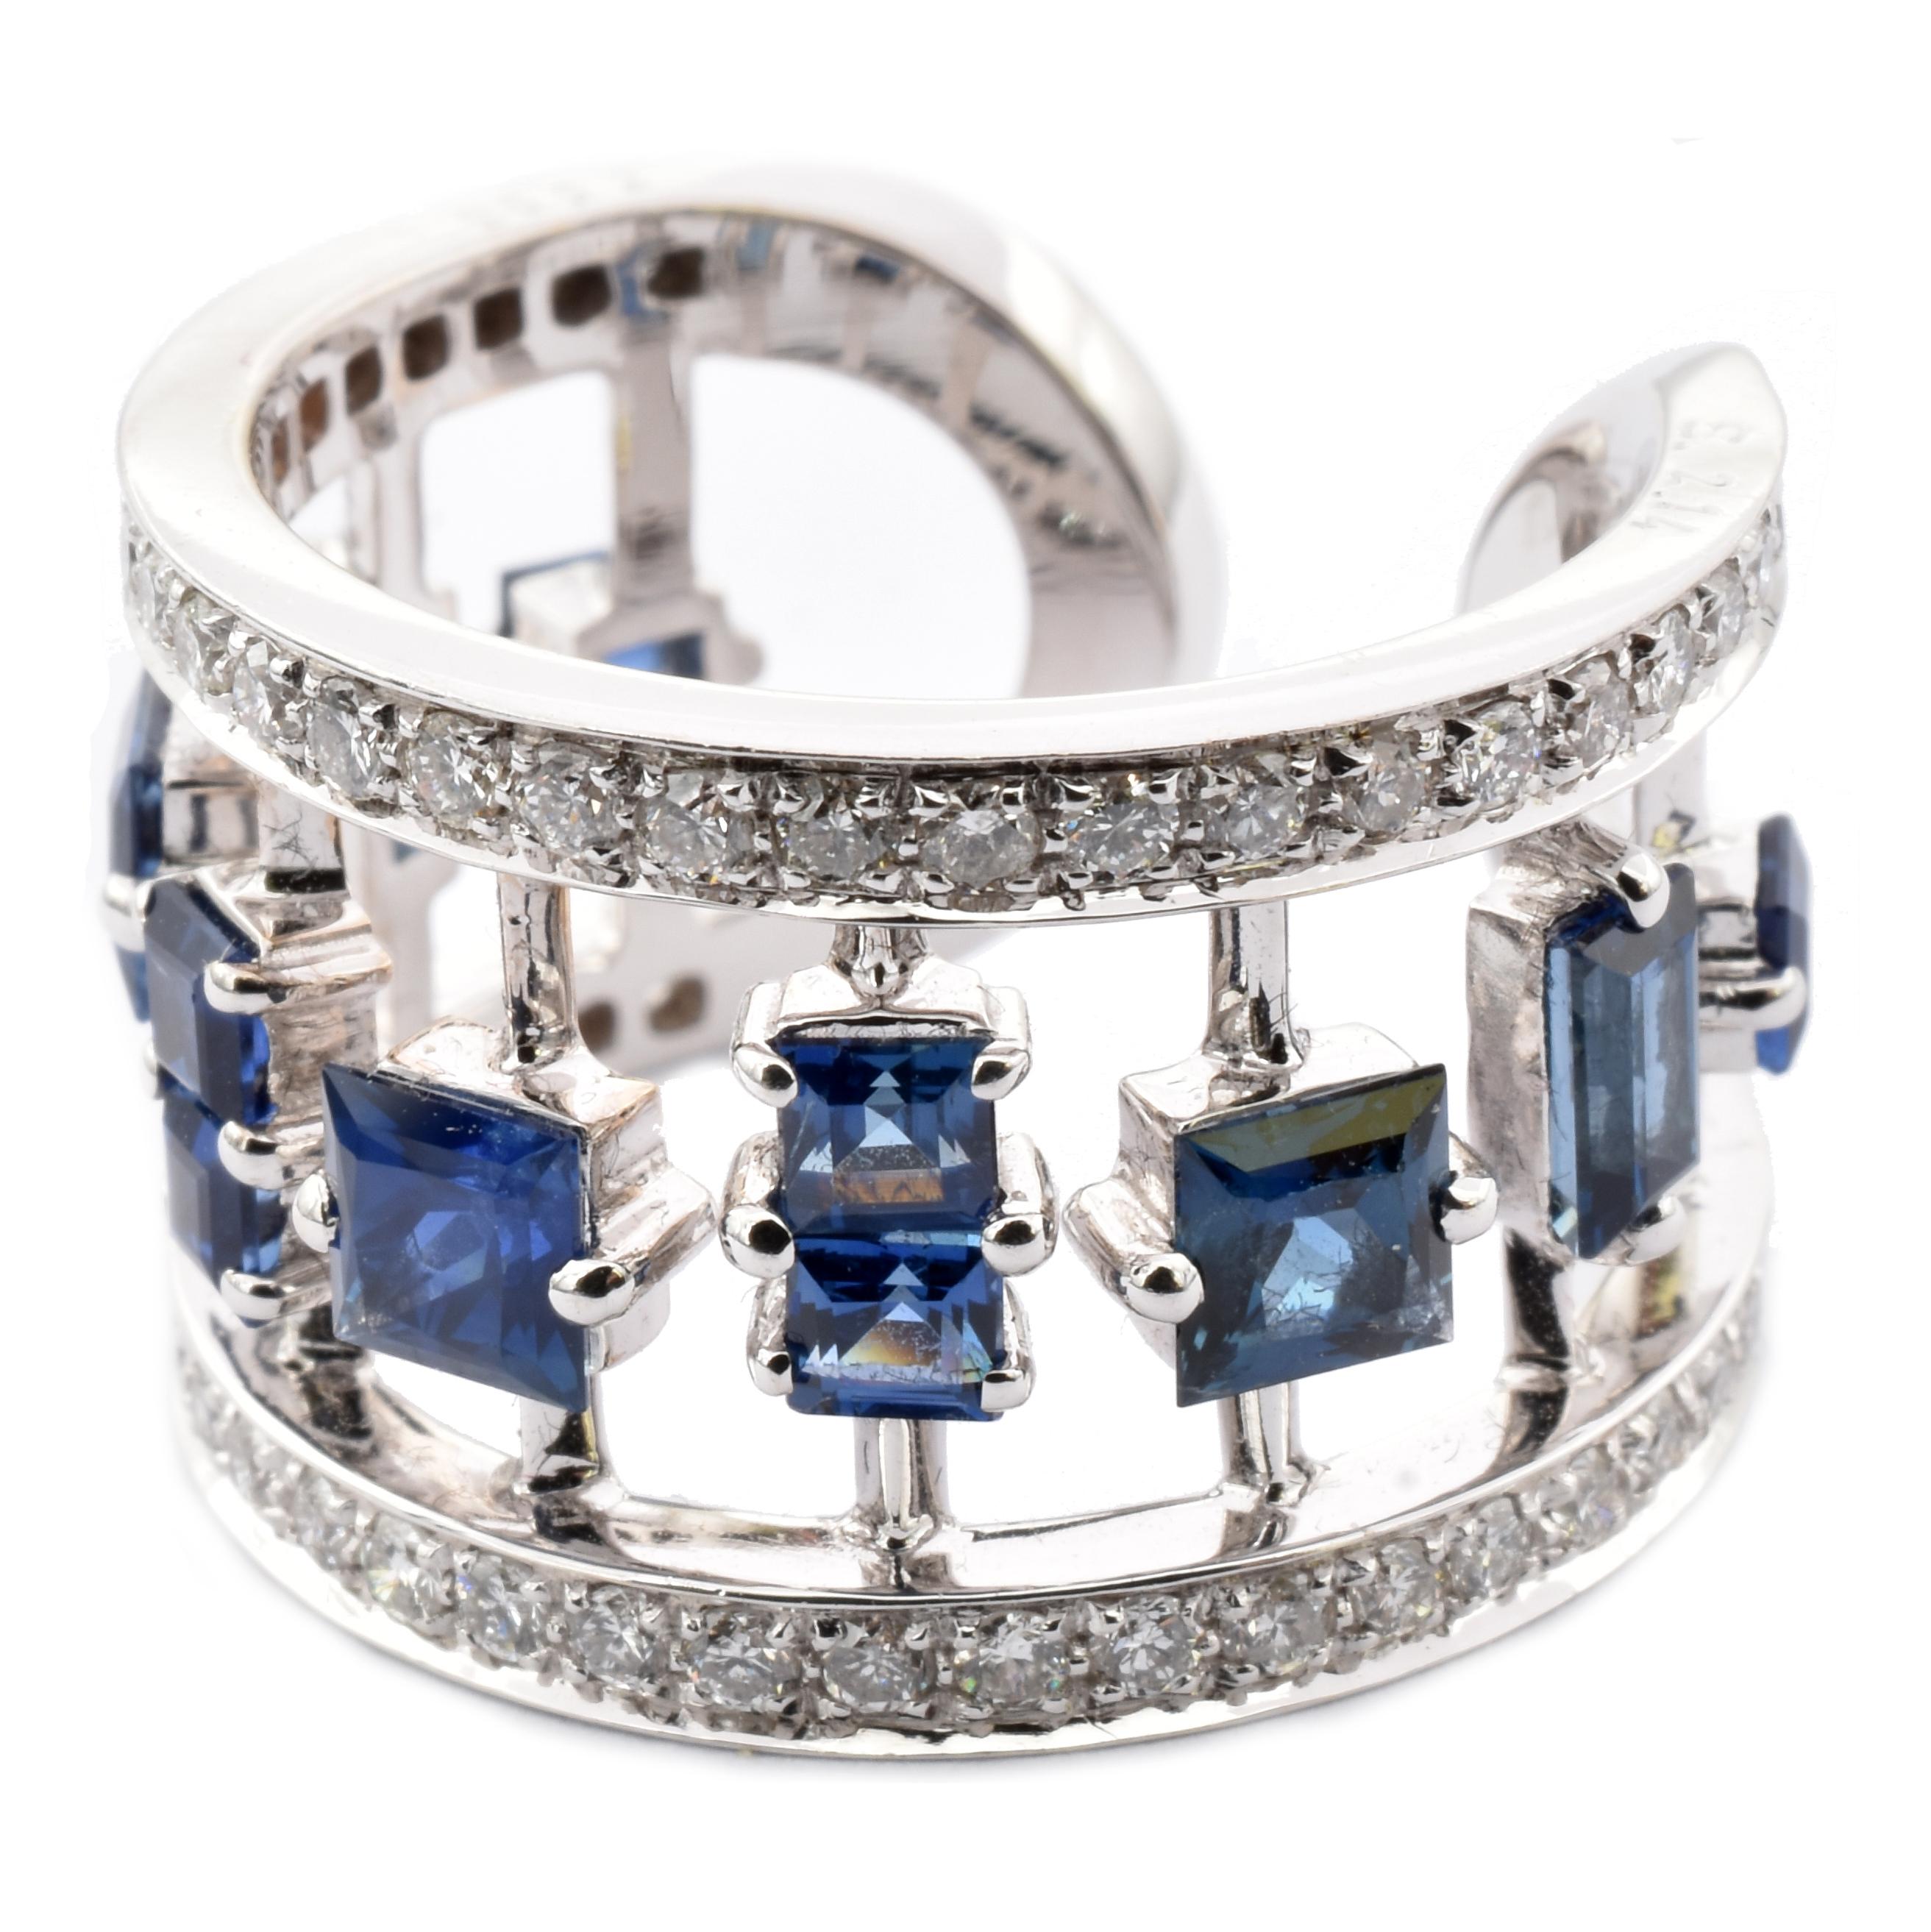 Gilberto Cassola 18Kt White Gold Fancy Band Ring with White Diamonds, Carrè and Baguette Cut Natural Blue Sapphires. 
Handmade in our Atelier in Valenza Italy.
G Color VS Clarity White Diamonds ct 0.66. 
Carrè and Baguette Cut Natural Blue Sapphires